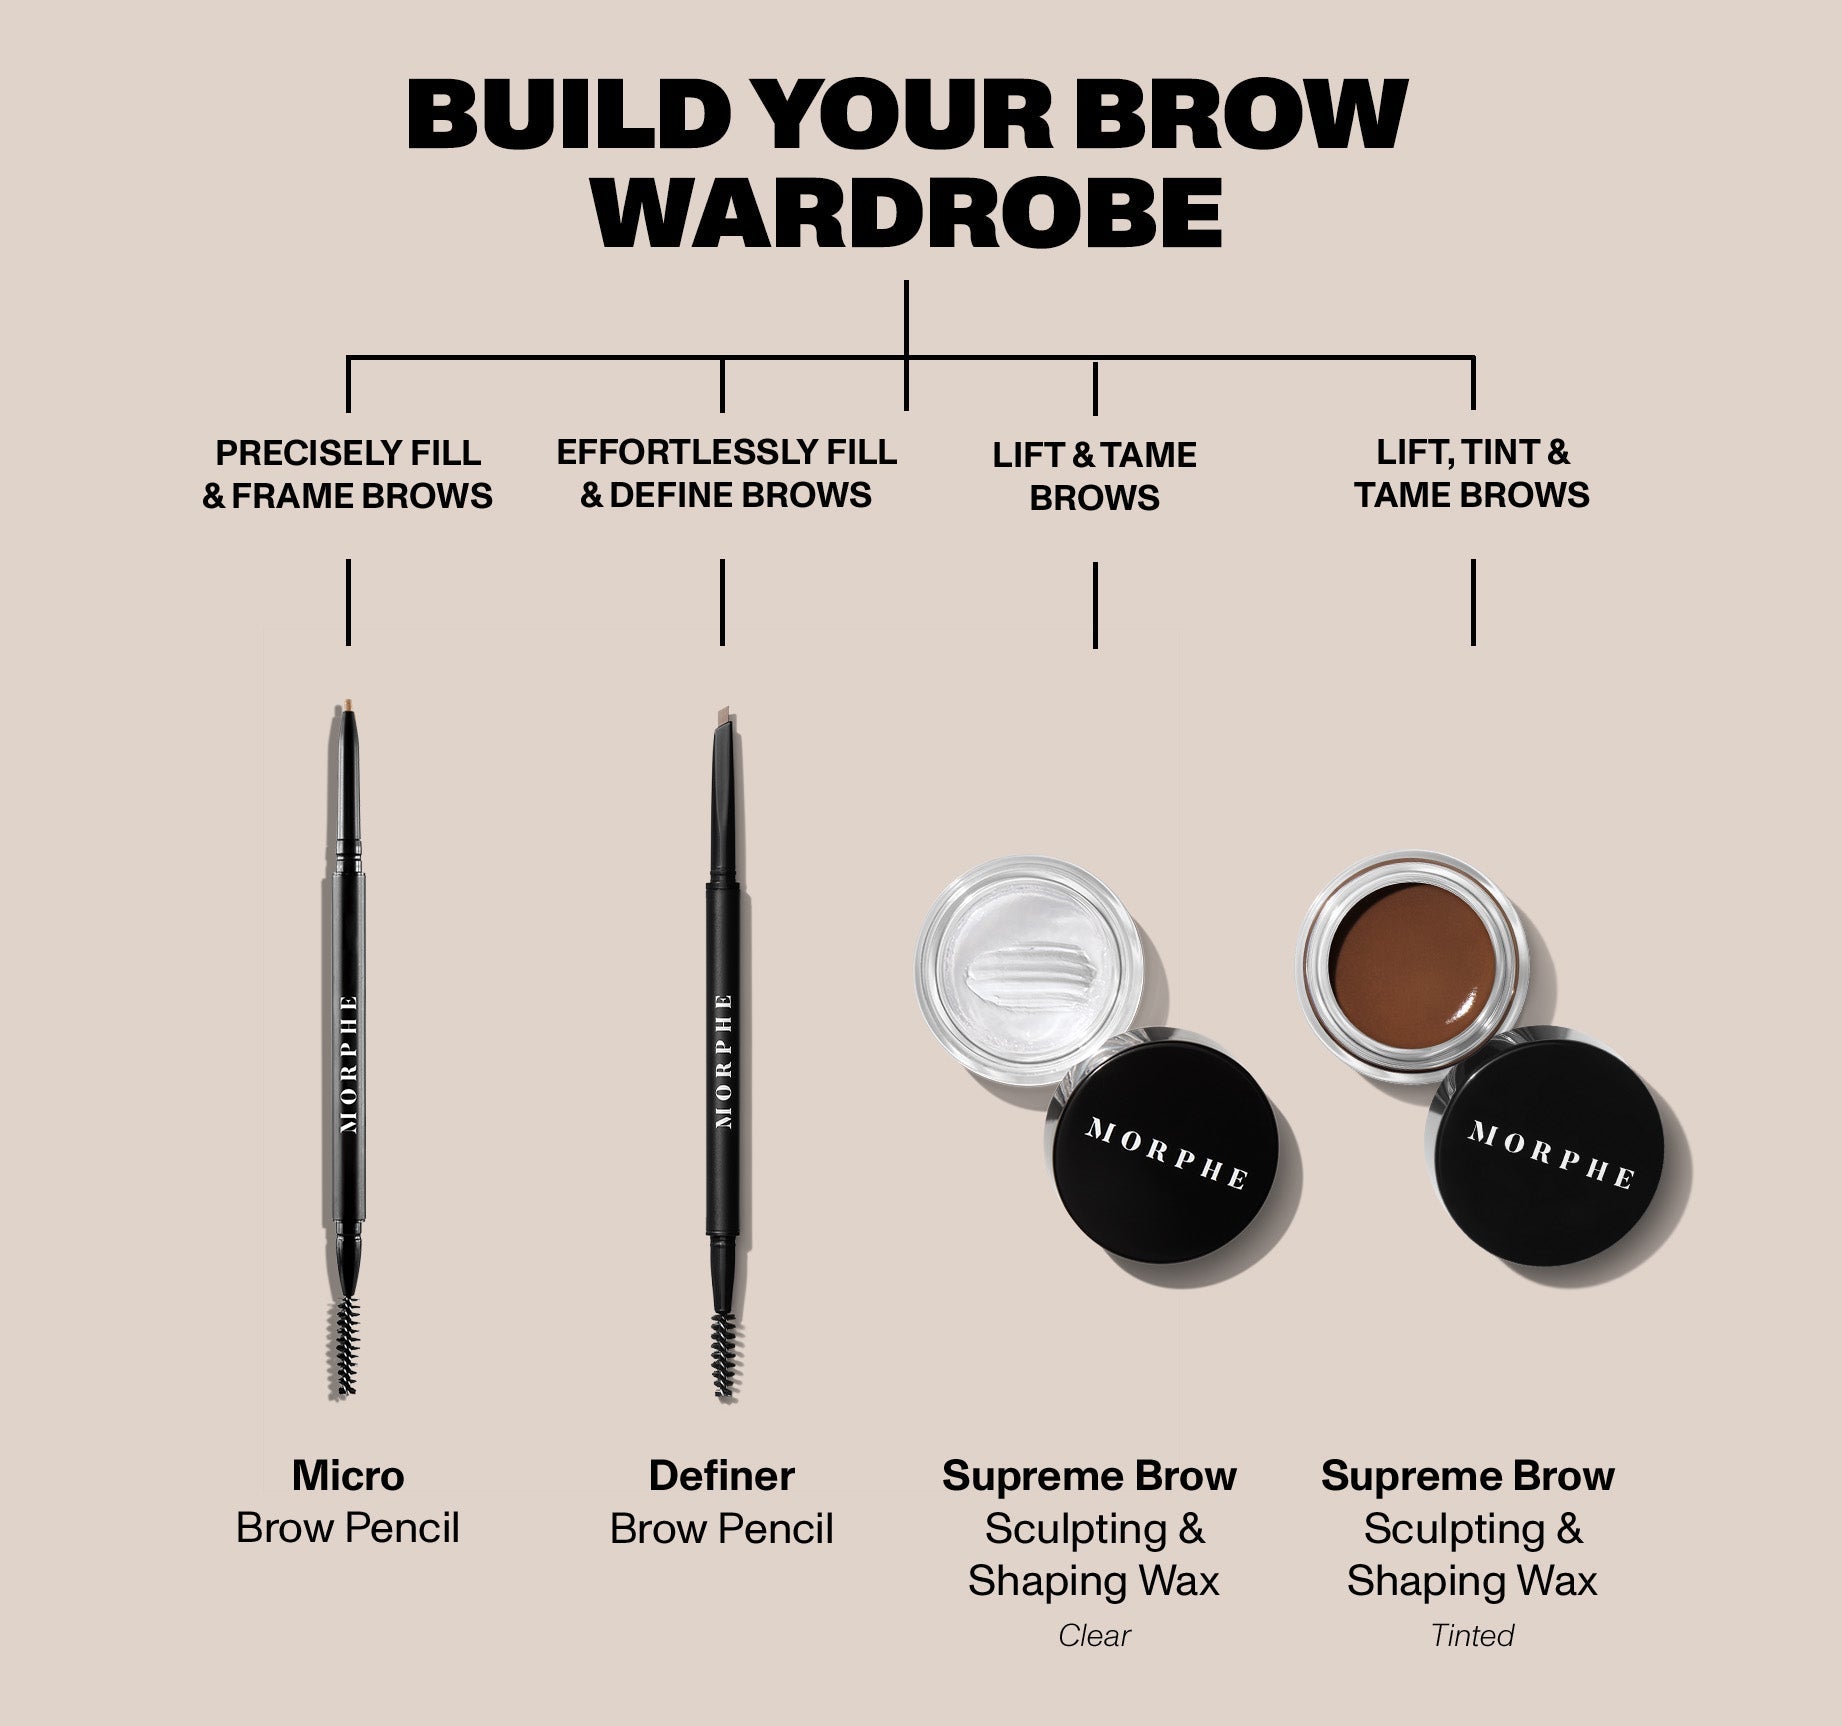 Supreme Brow Sculpting And Shaping Wax - Almond - Image 9